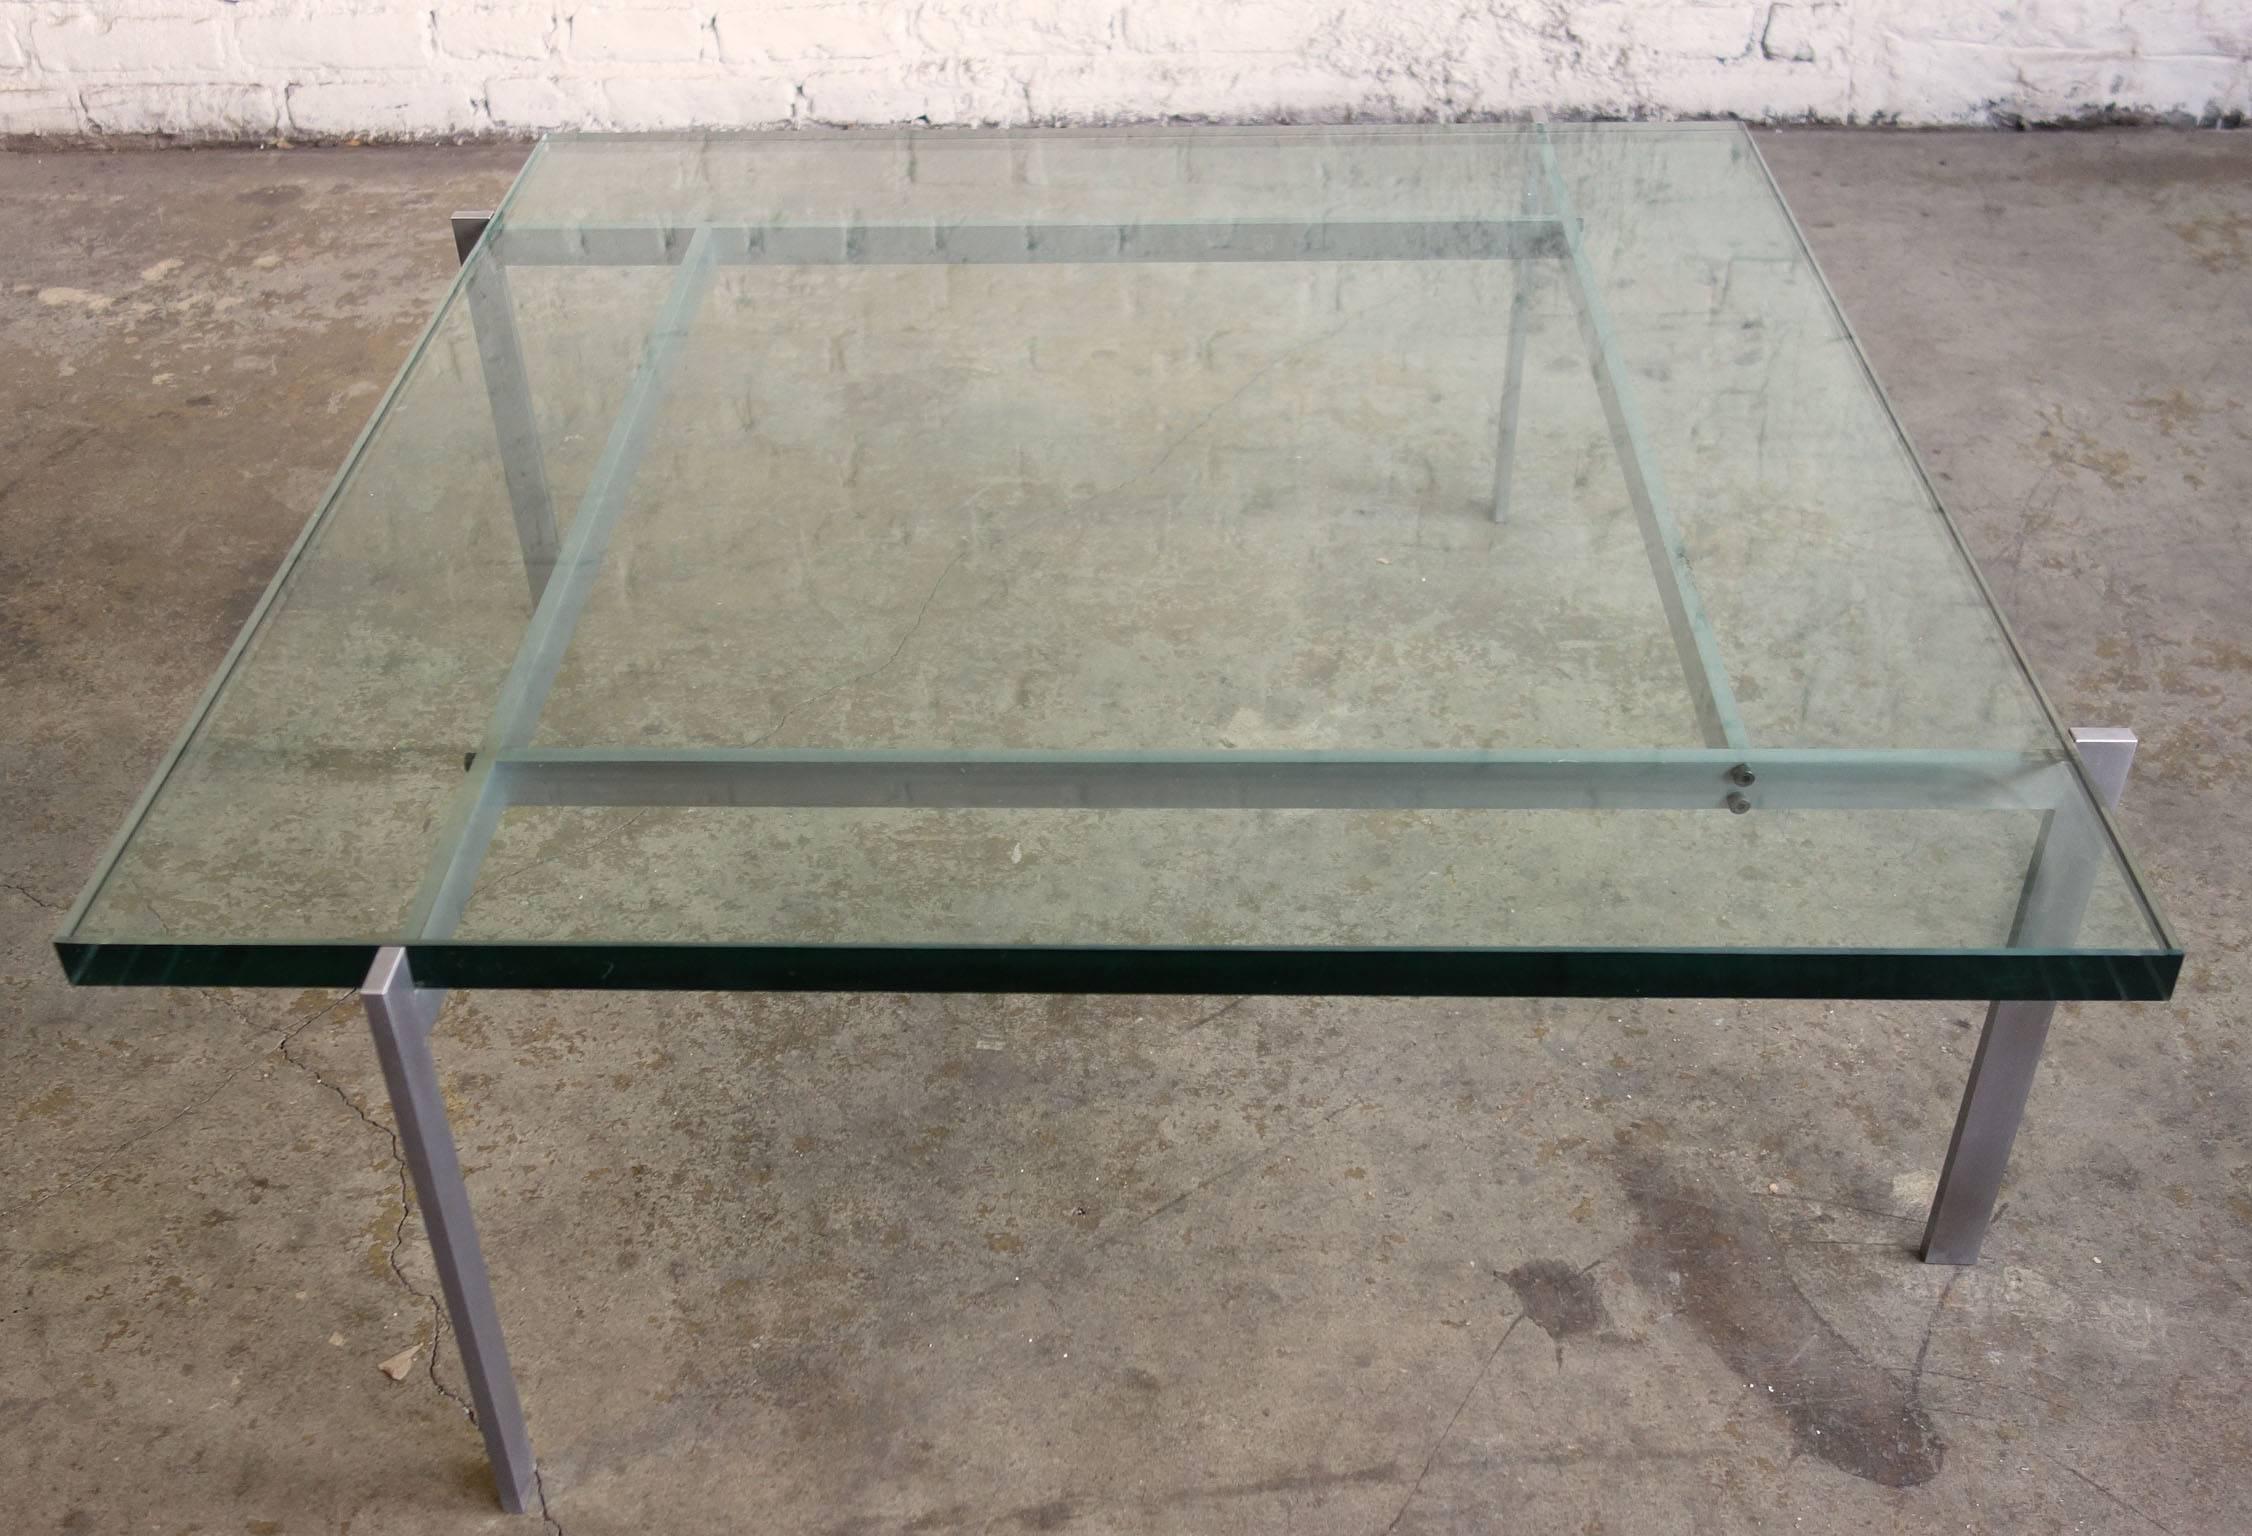 Mid-Century low table by Poul Kjaerholm, PK 61
Produced by E. Kold Christensen, Denmark. Stamped
original glass and frame showing little use.